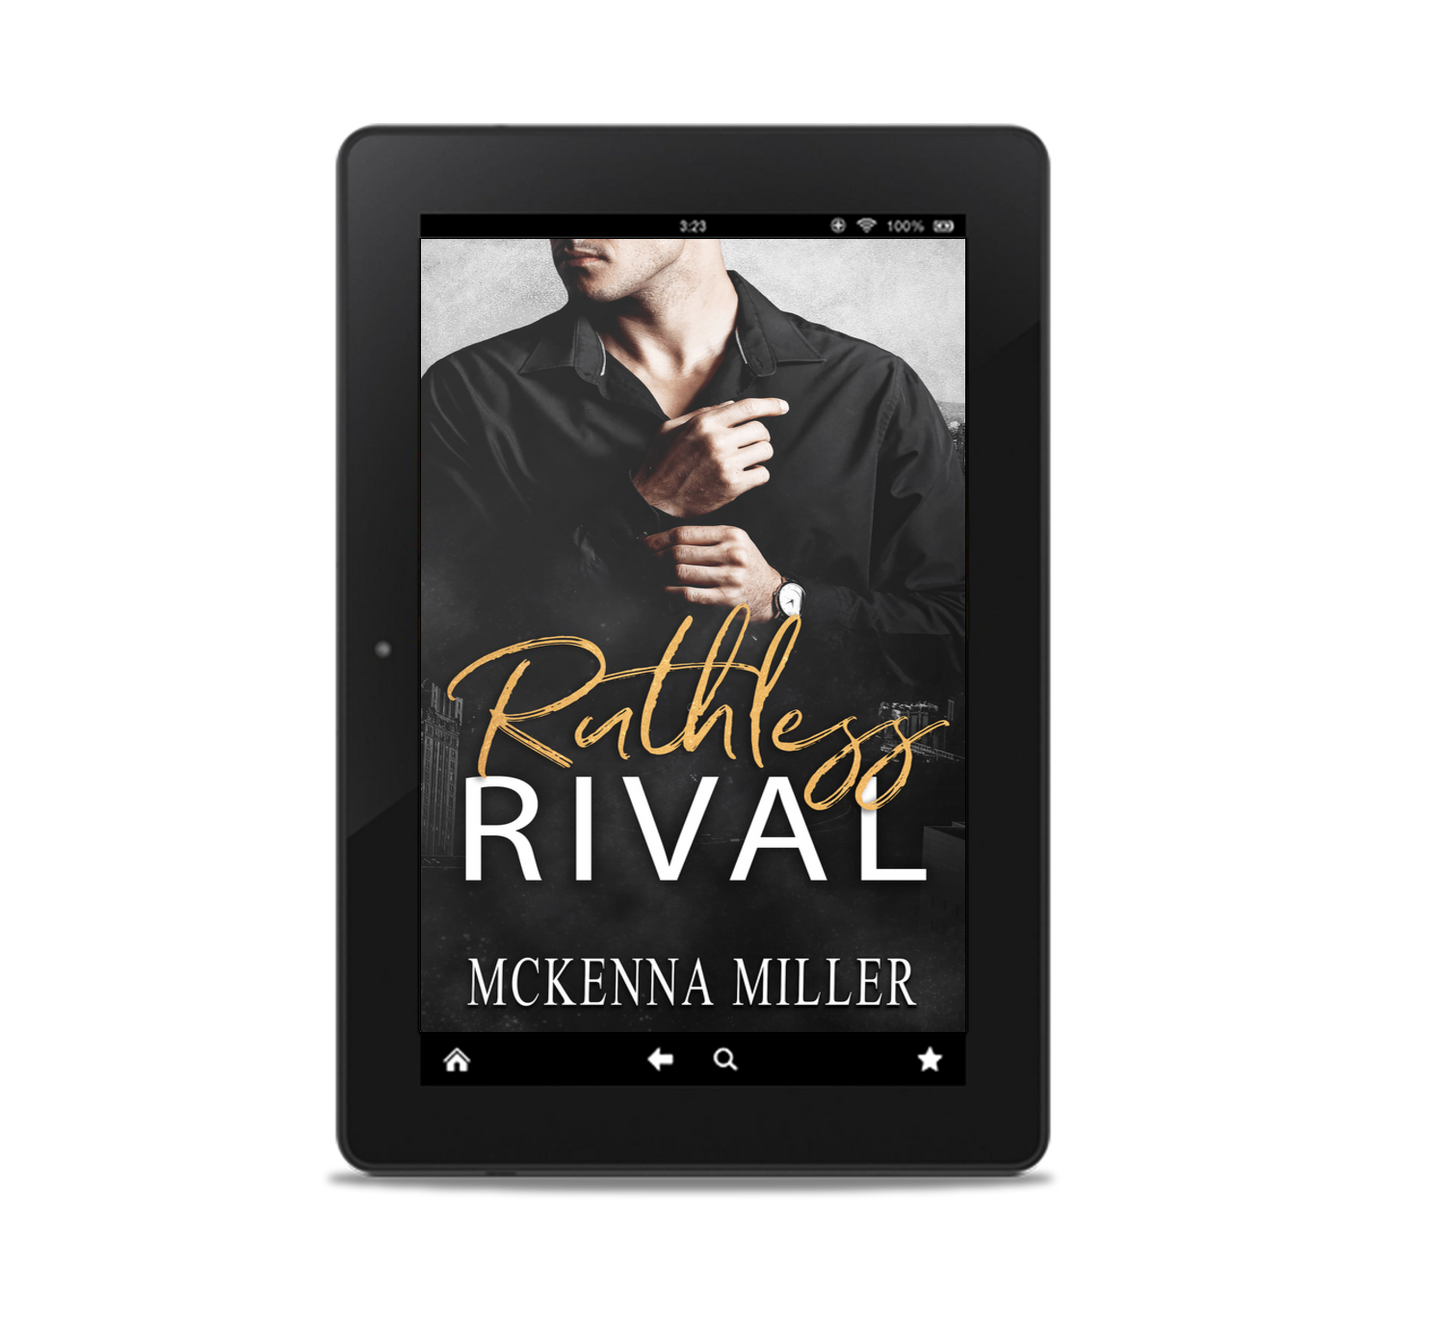 Ruthless Rival: Enemies to Lovers Romance